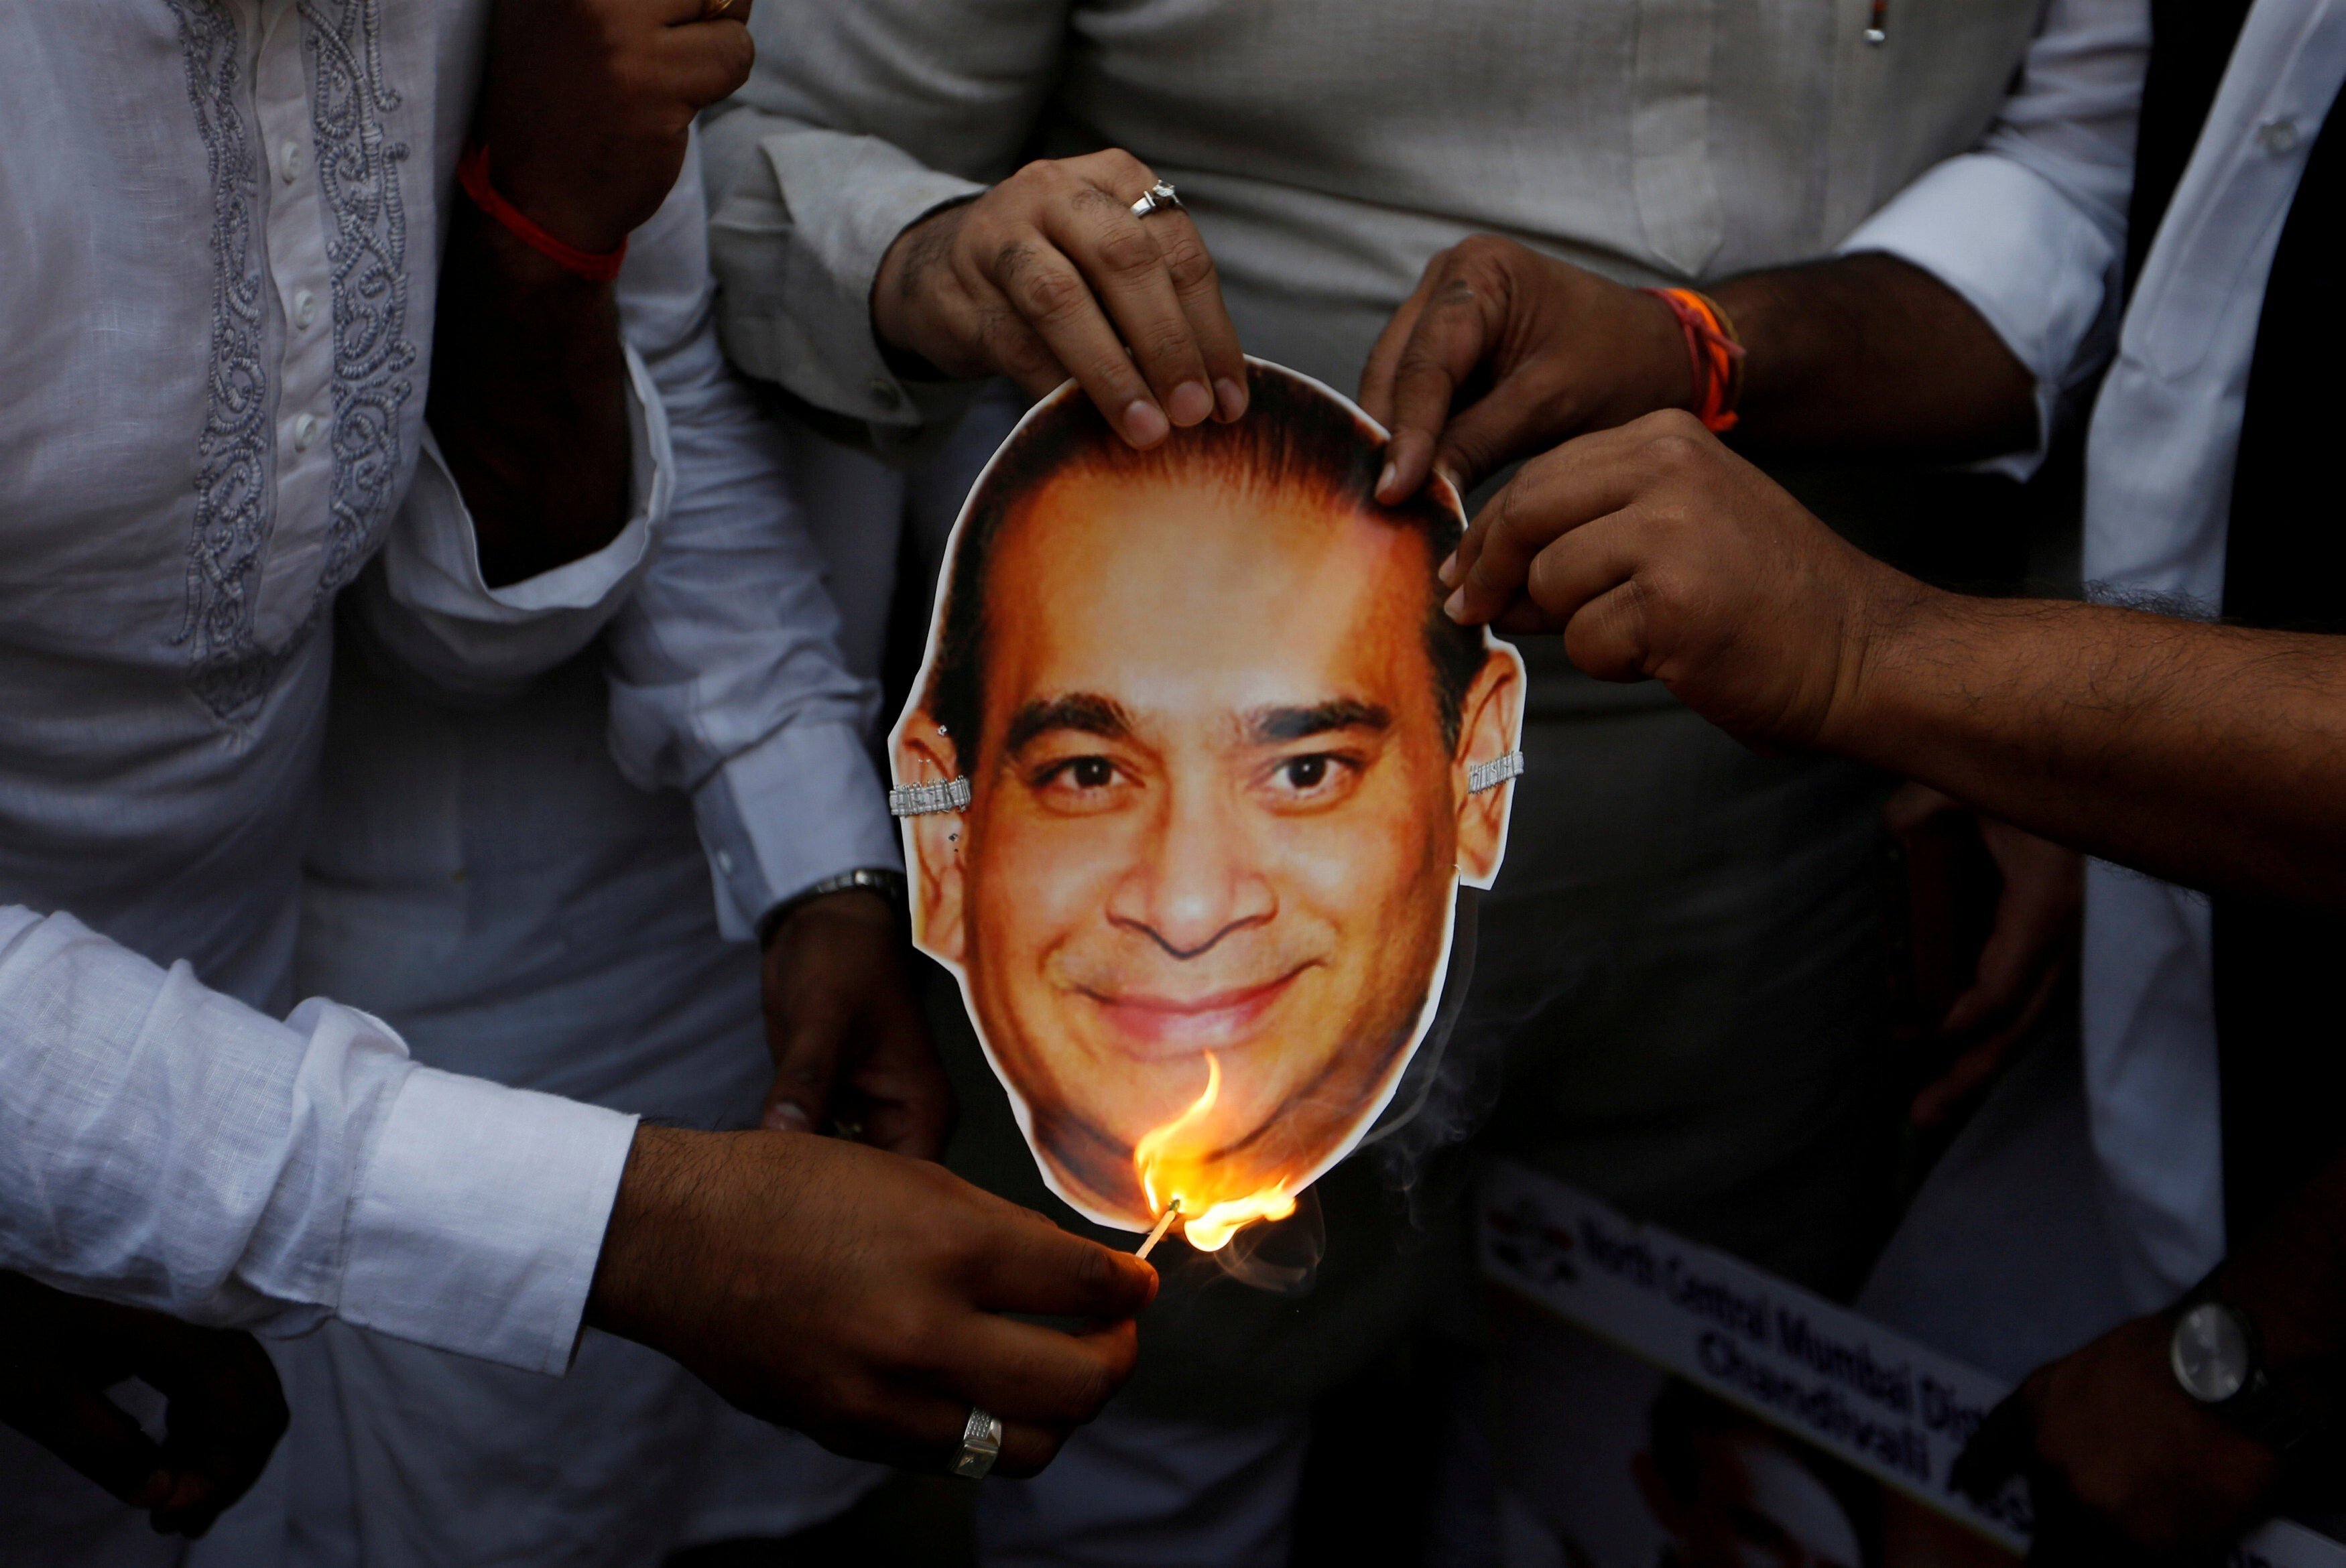 Activists burn a cut-out showing an image of billionaire Indian jeweller Nirav Modi – who alongside his uncle Mehul Choksi is wanted in India over the US$2 billion Punjab National Bank fraud – during a protest in Mumbai in 2018. Photo: Reuters